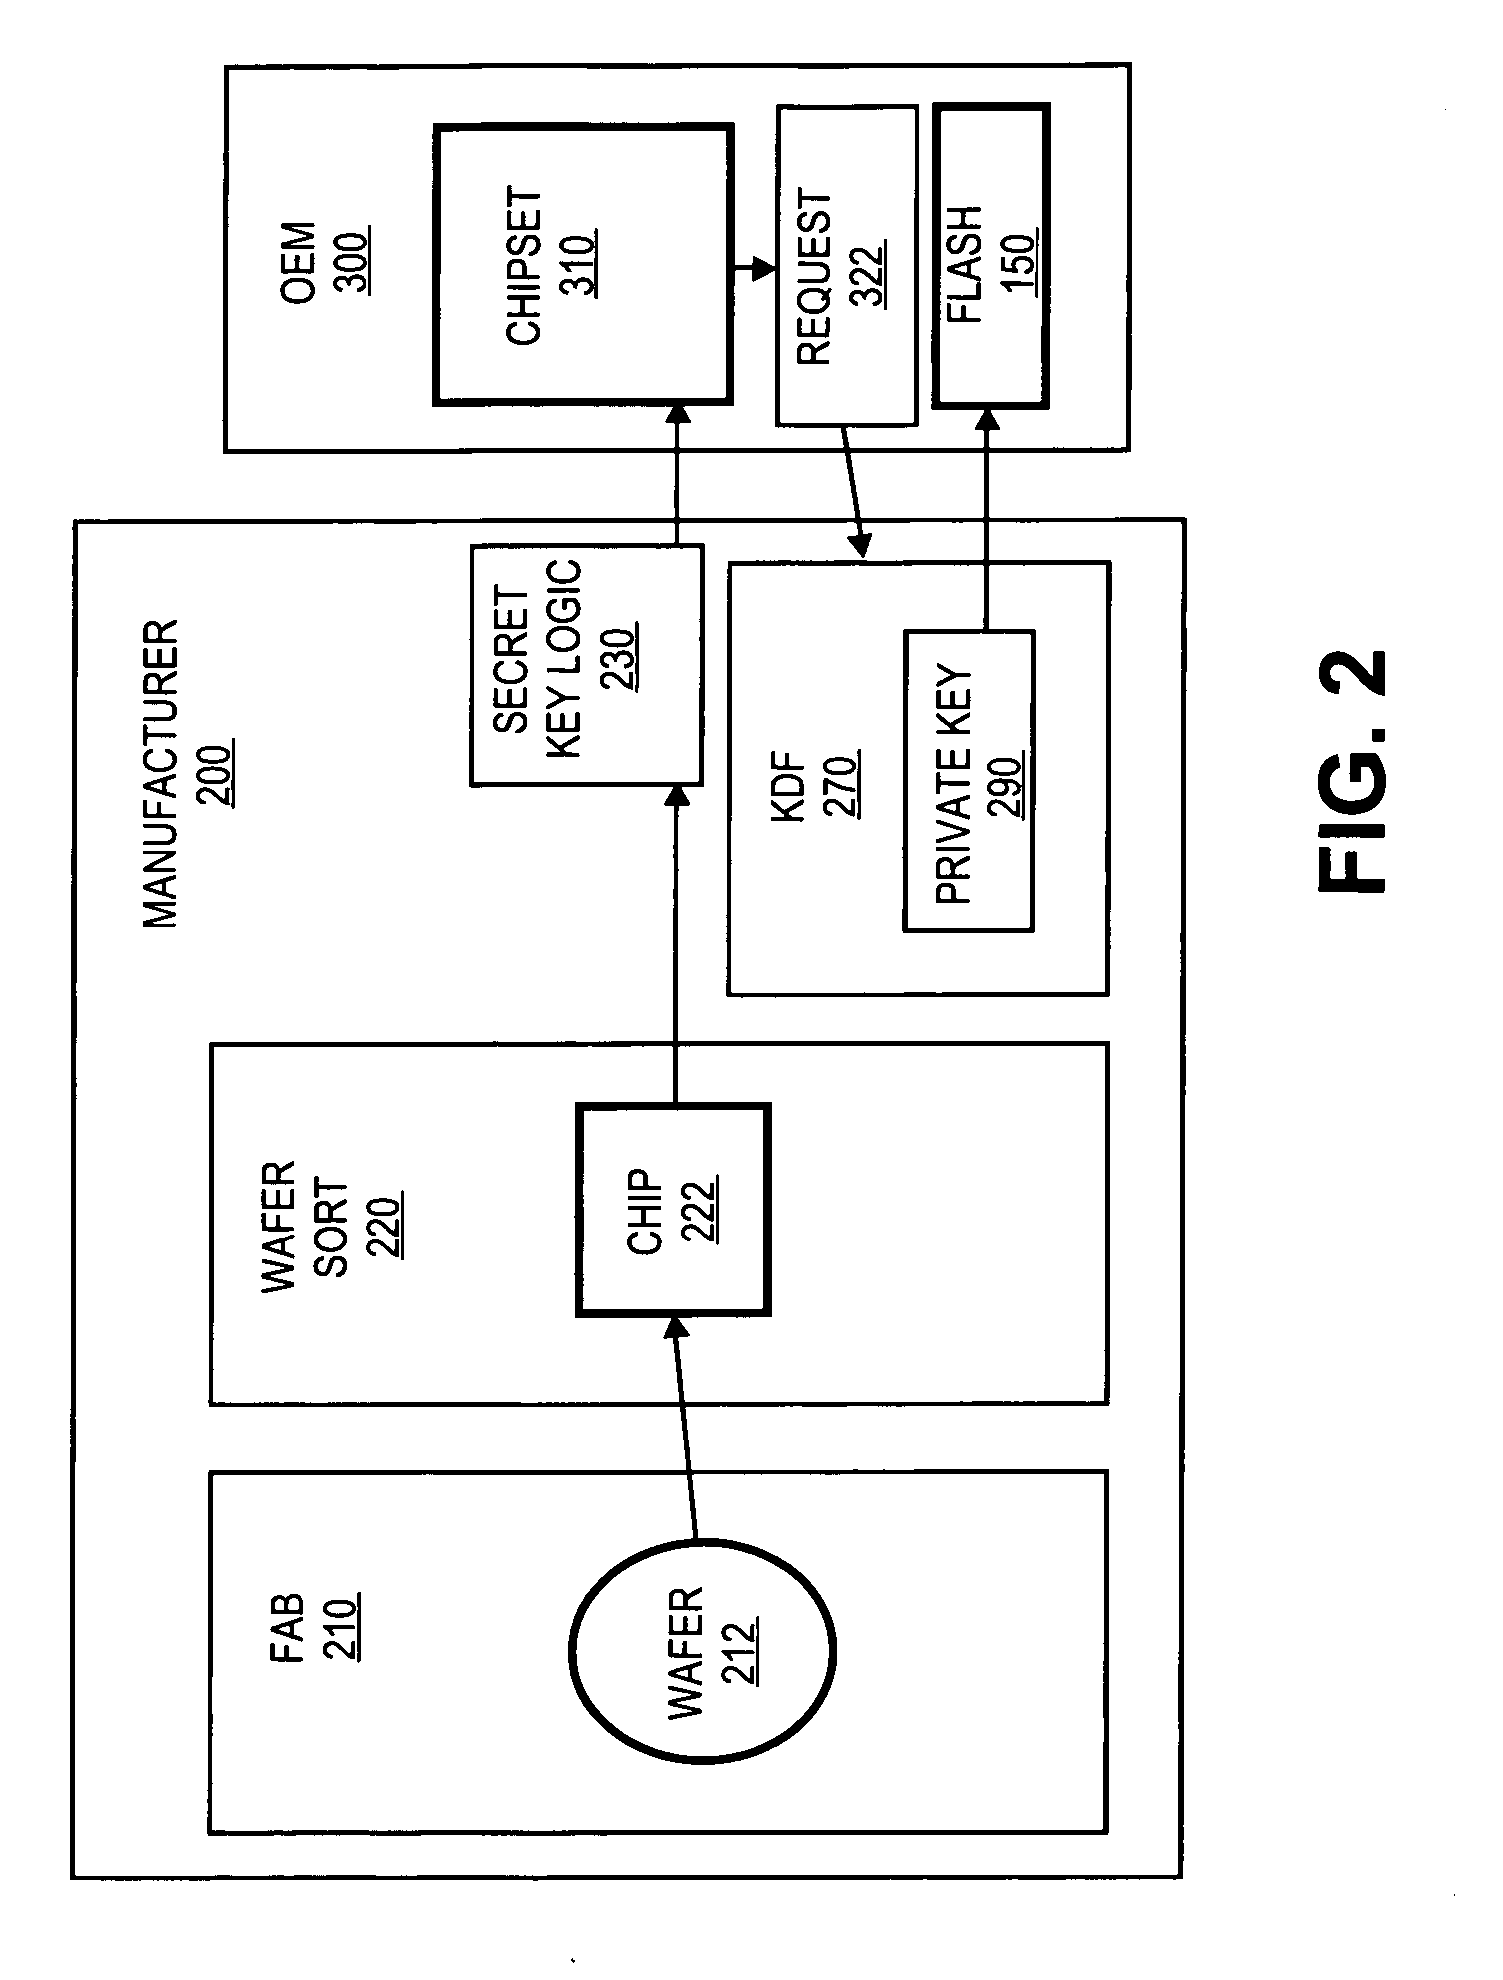 Apparatus and method for distributing private keys to an entity with minimal secret, unique information